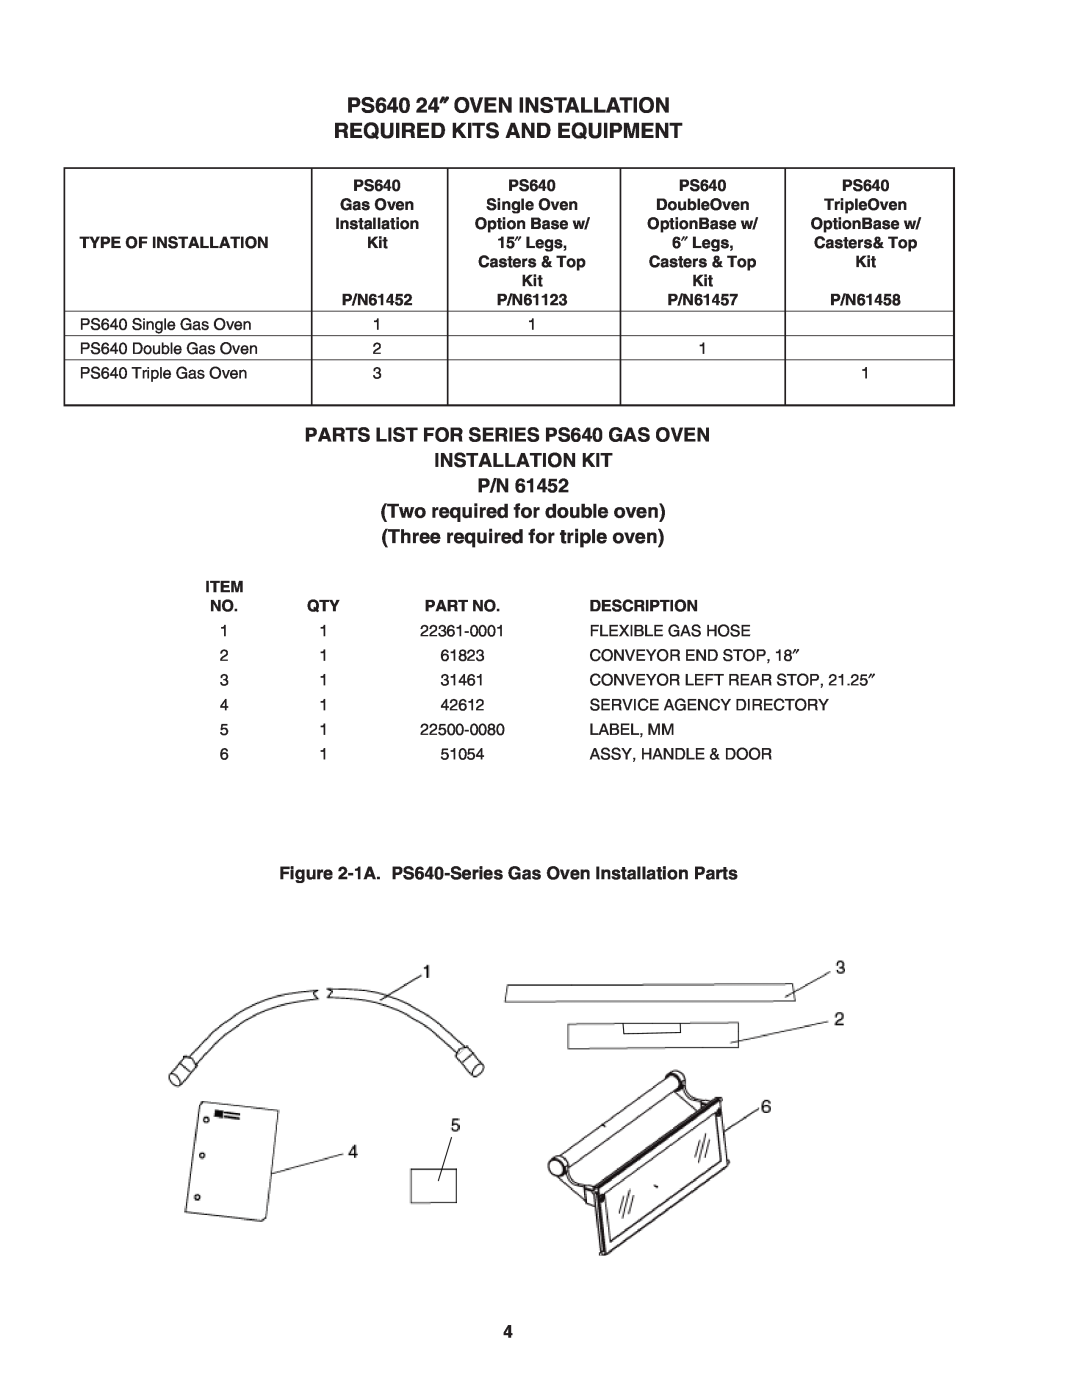 Middleby Marshall PS640 24″ OVEN INSTALLATION REQUIRED KITS AND EQUIPMENT, 1A. PS640-Series Gas Oven Installation Parts 